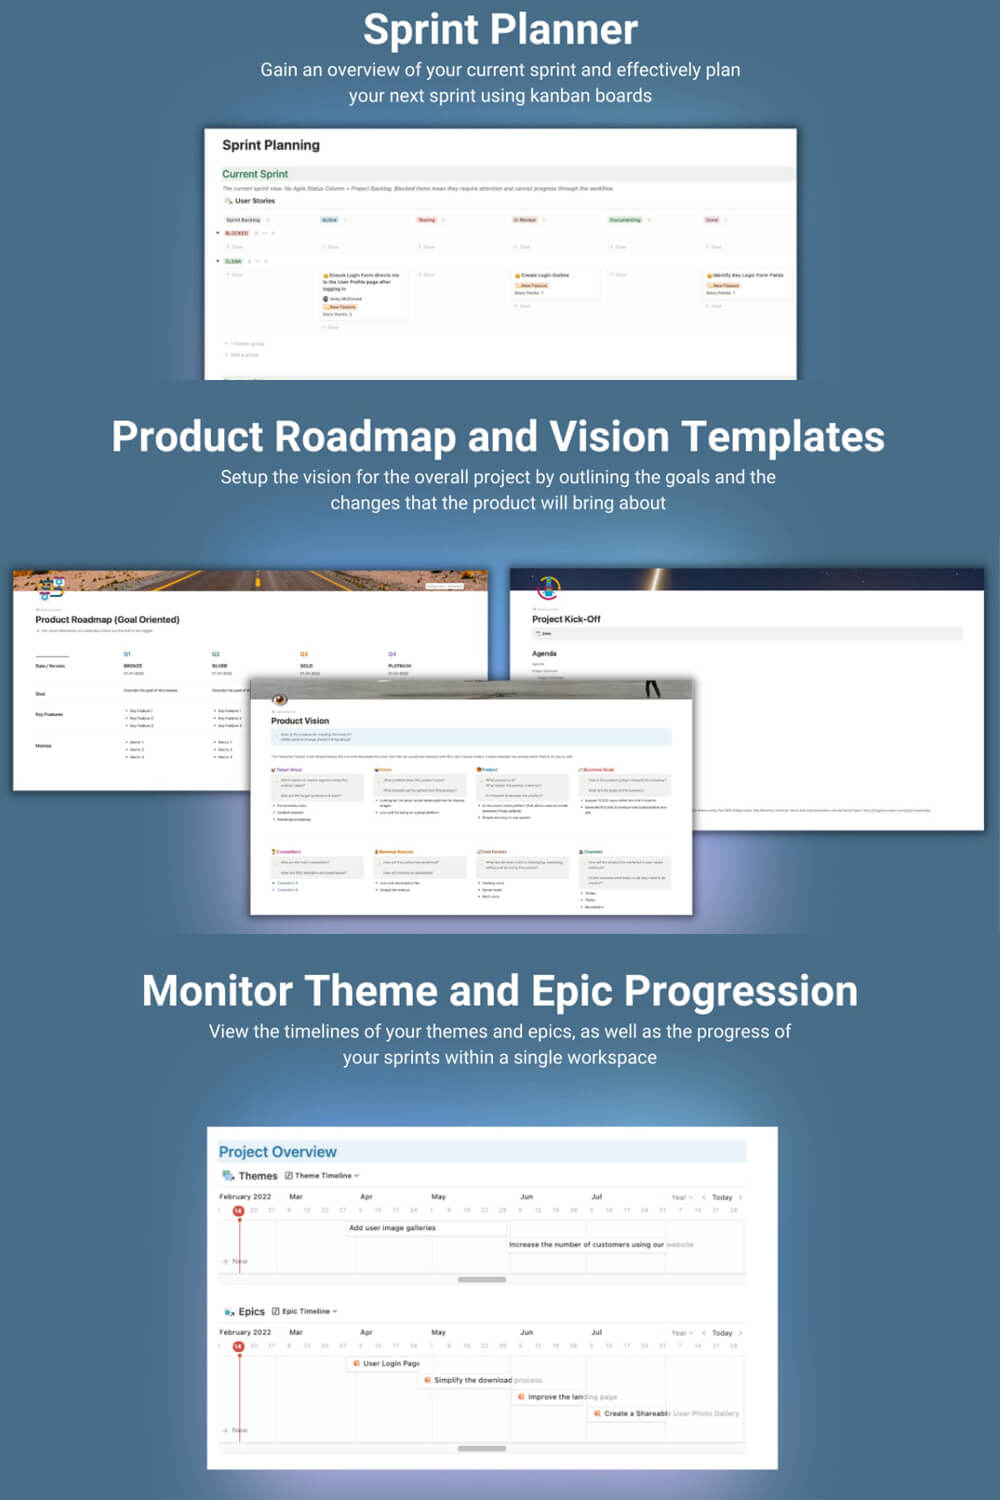 Sprint Planner, Product roadmap and vision templates and monitor theme and epic progression.